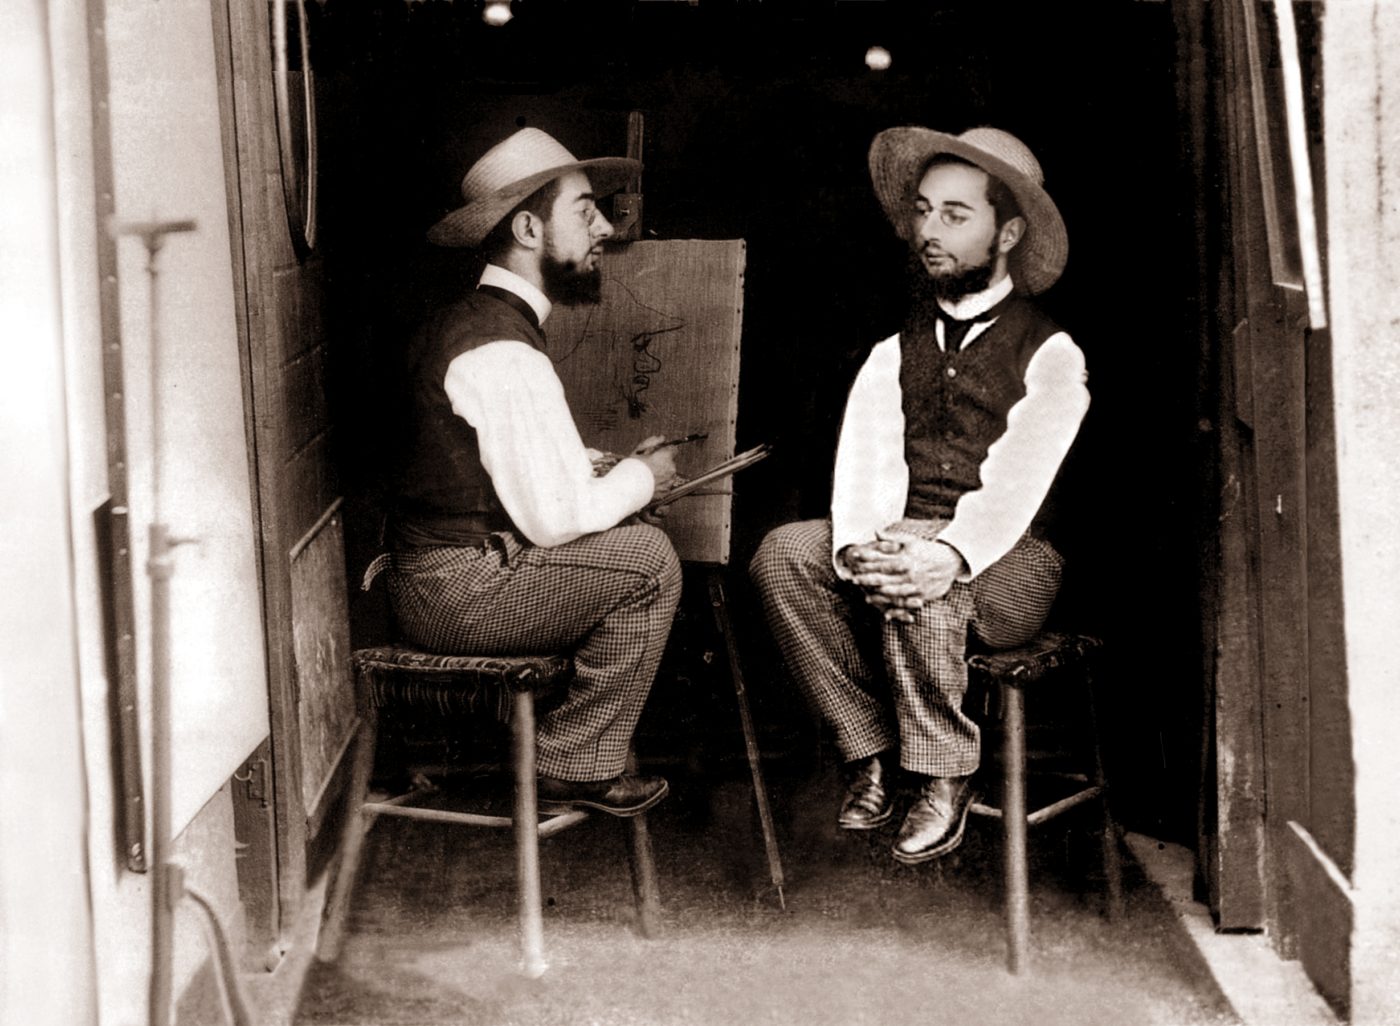 Vintage photograph of a man painting at an easel with his clone as the subject